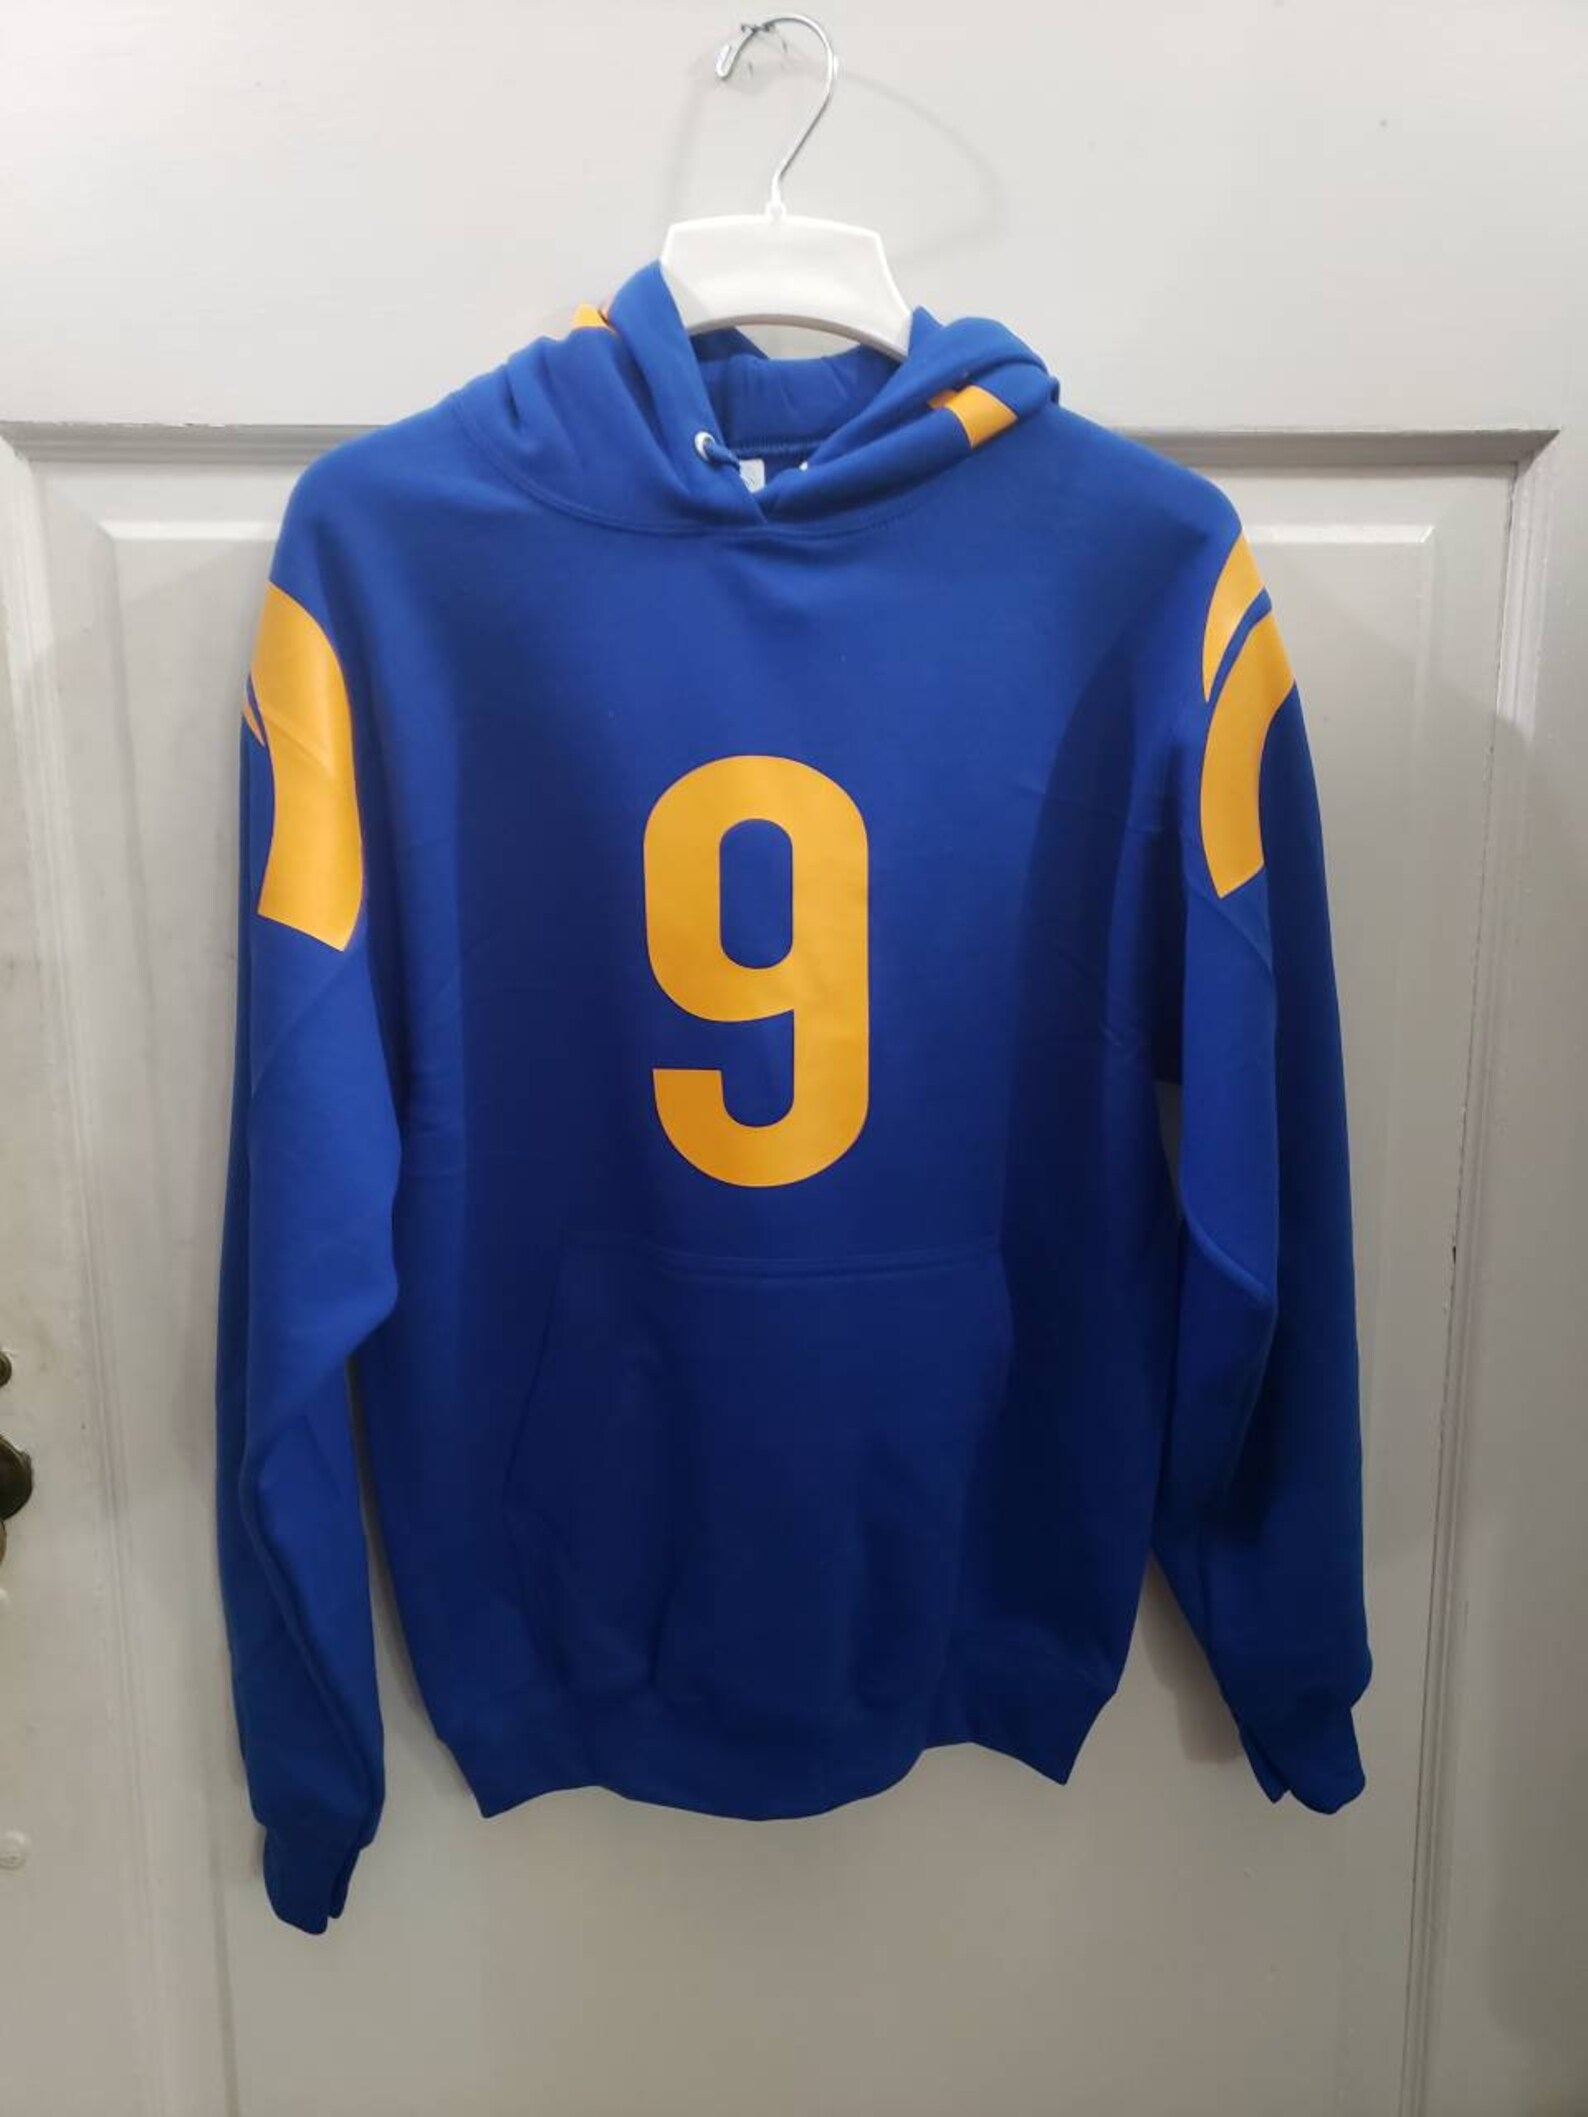 Los Angeles Rams Inspired Hooded Sweatshirt Can Be Customized | Etsy